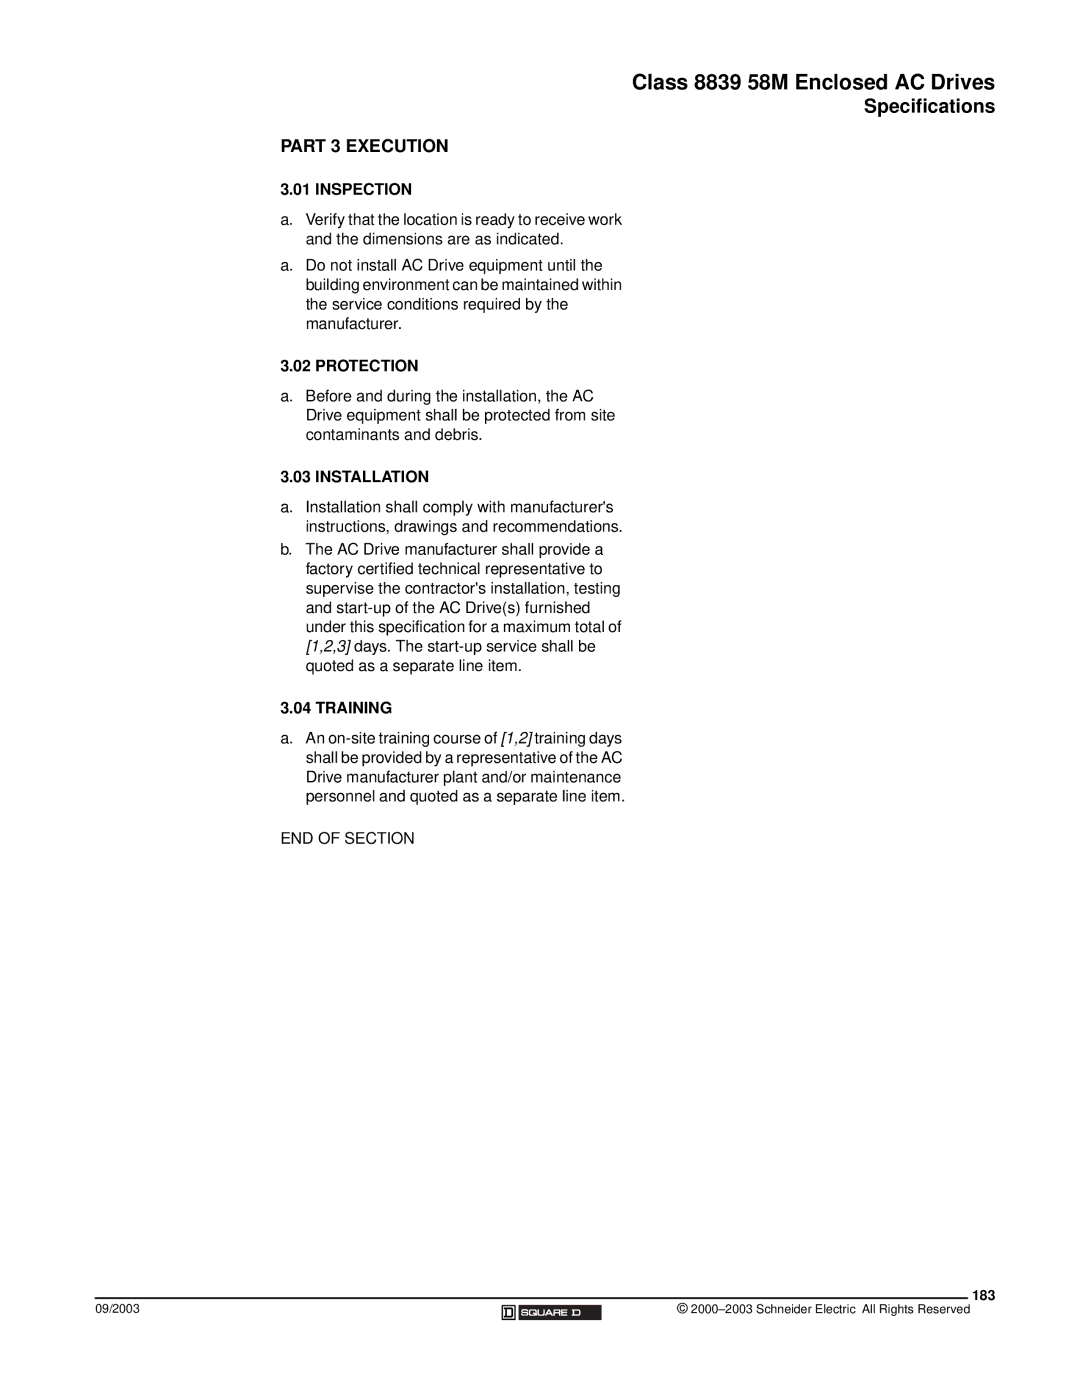 Schneider Electric 58 TRX manual Part 3 Execution, Inspection, Installation, Training, 183 